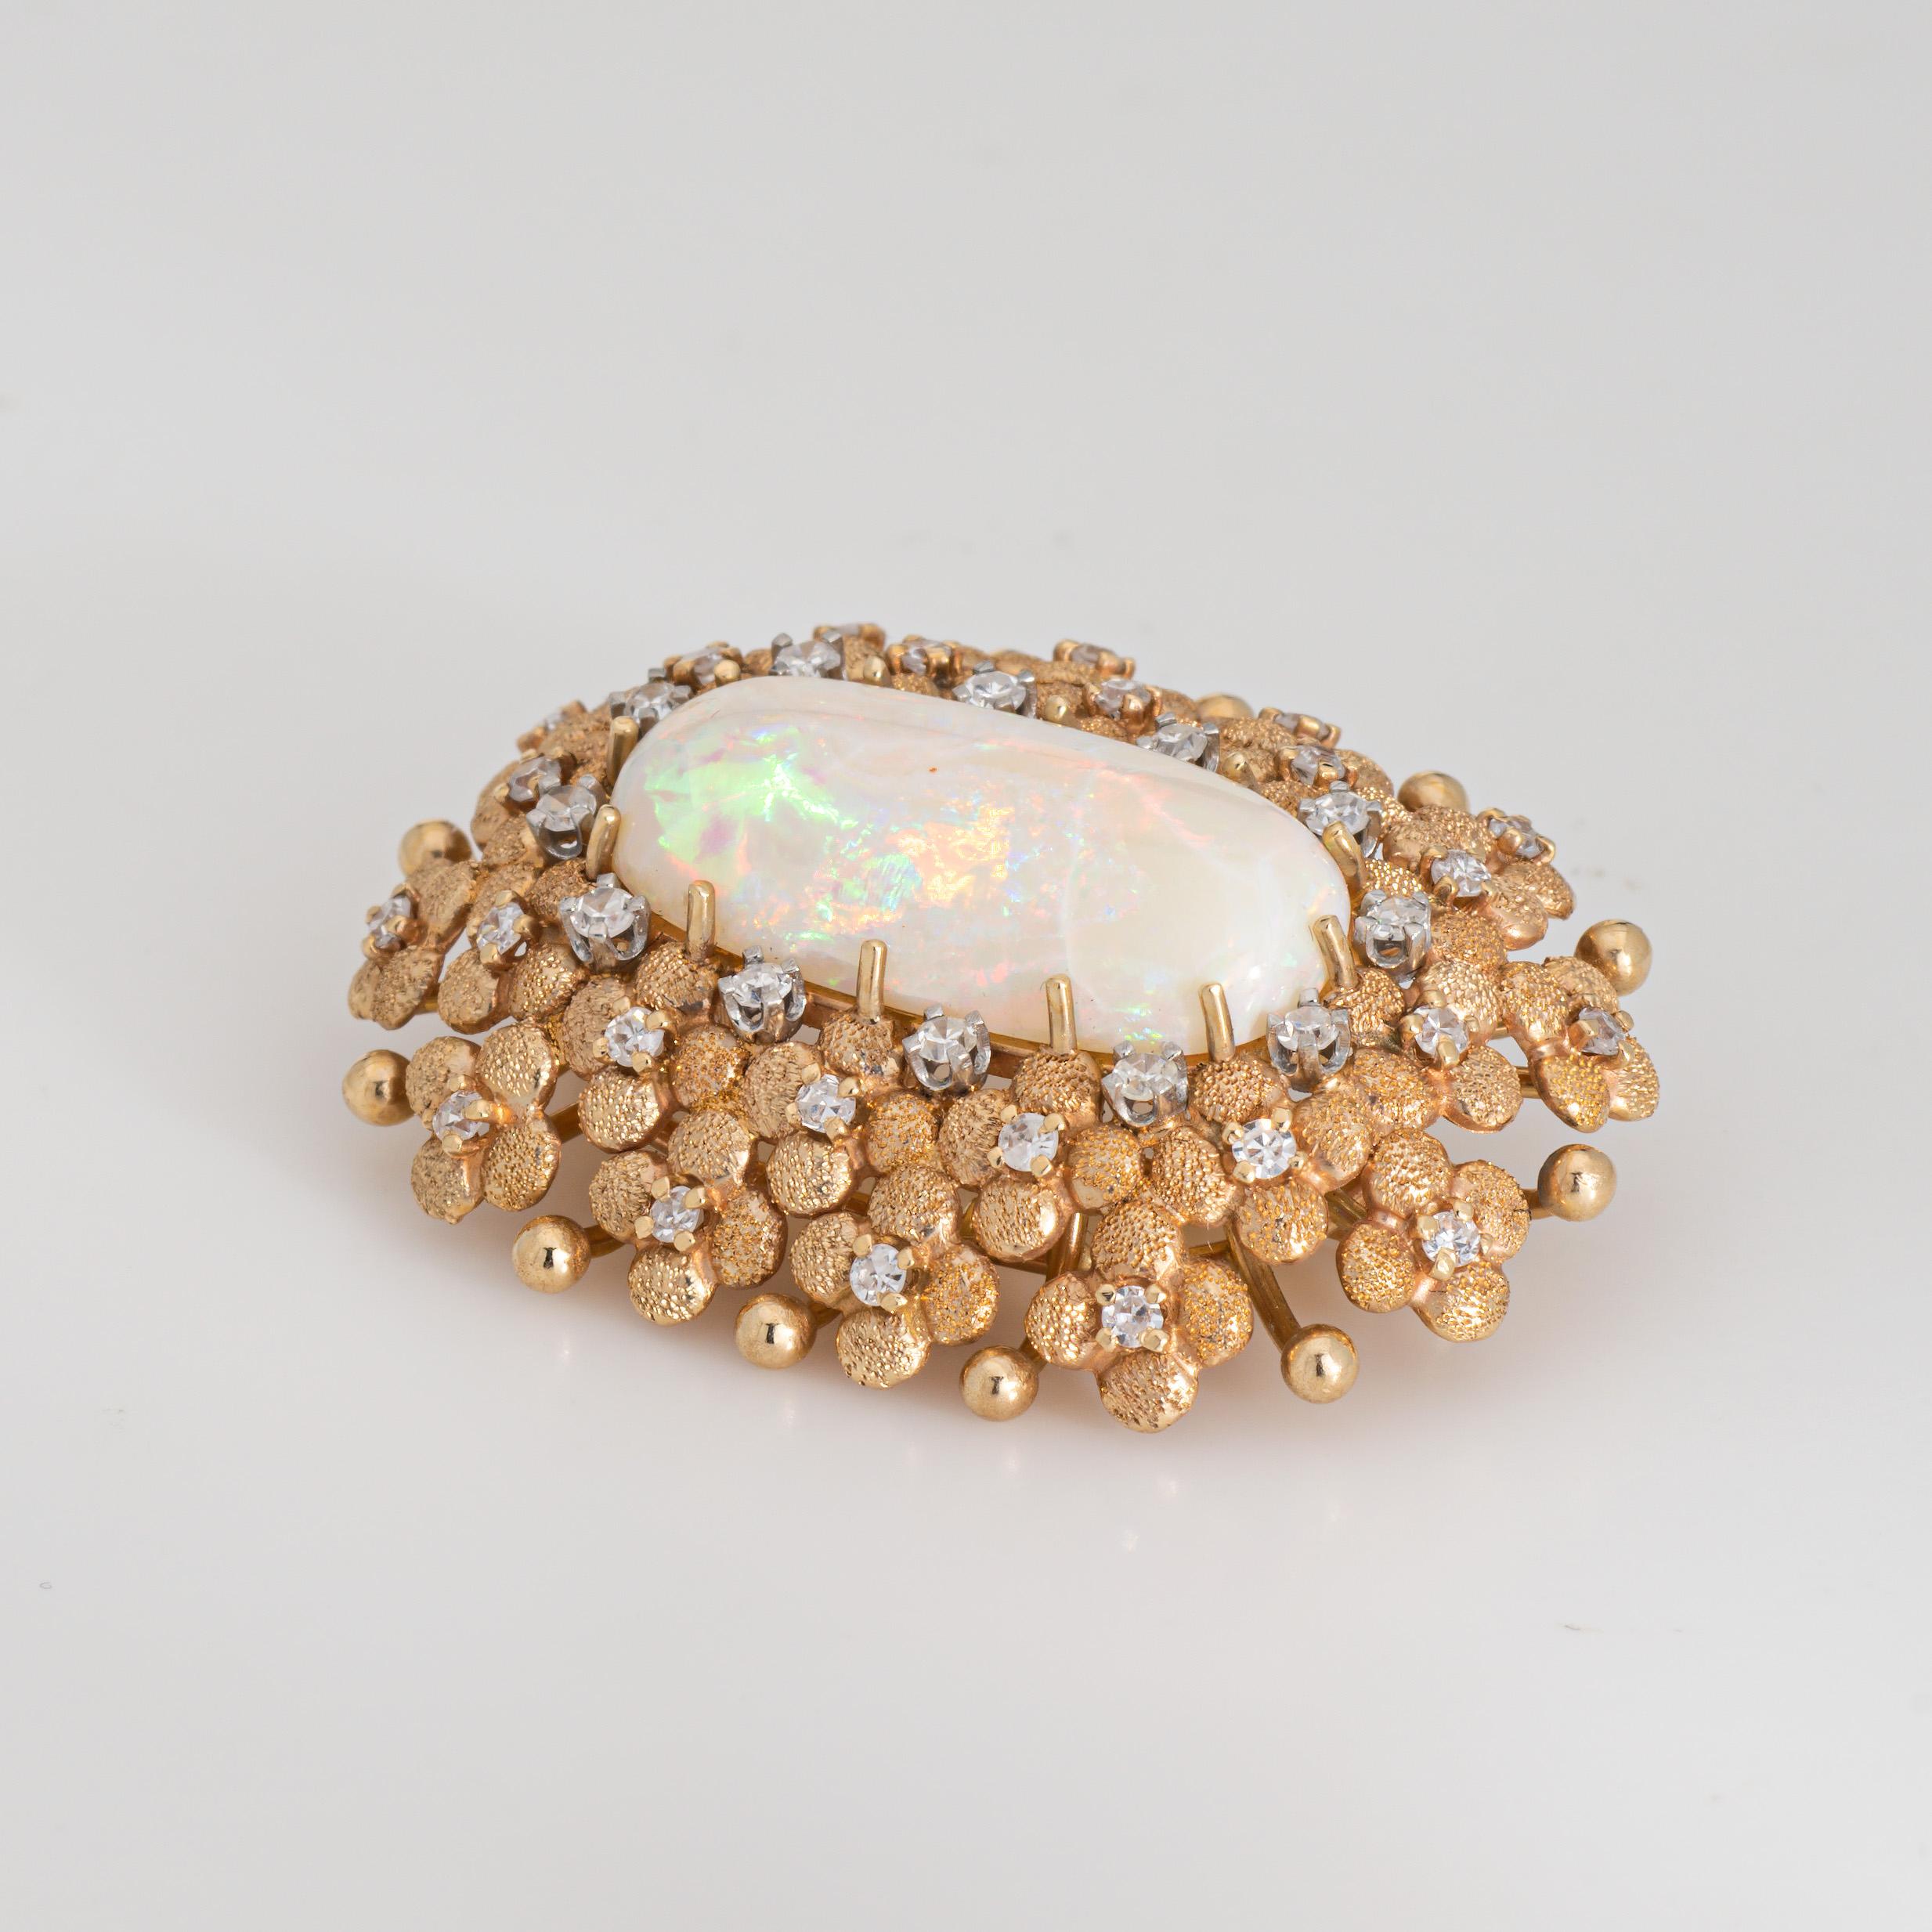 Stylish and finely detailed large opal & diamond brooch crafted in 14 karat yellow gold (circa 1960s).

Cabochon cut opal measures 23mm x 12mm. Single cut diamonds total an estimated 0.20 carats (estimated at H-I color and VS2-SI2 clarity). 

A long